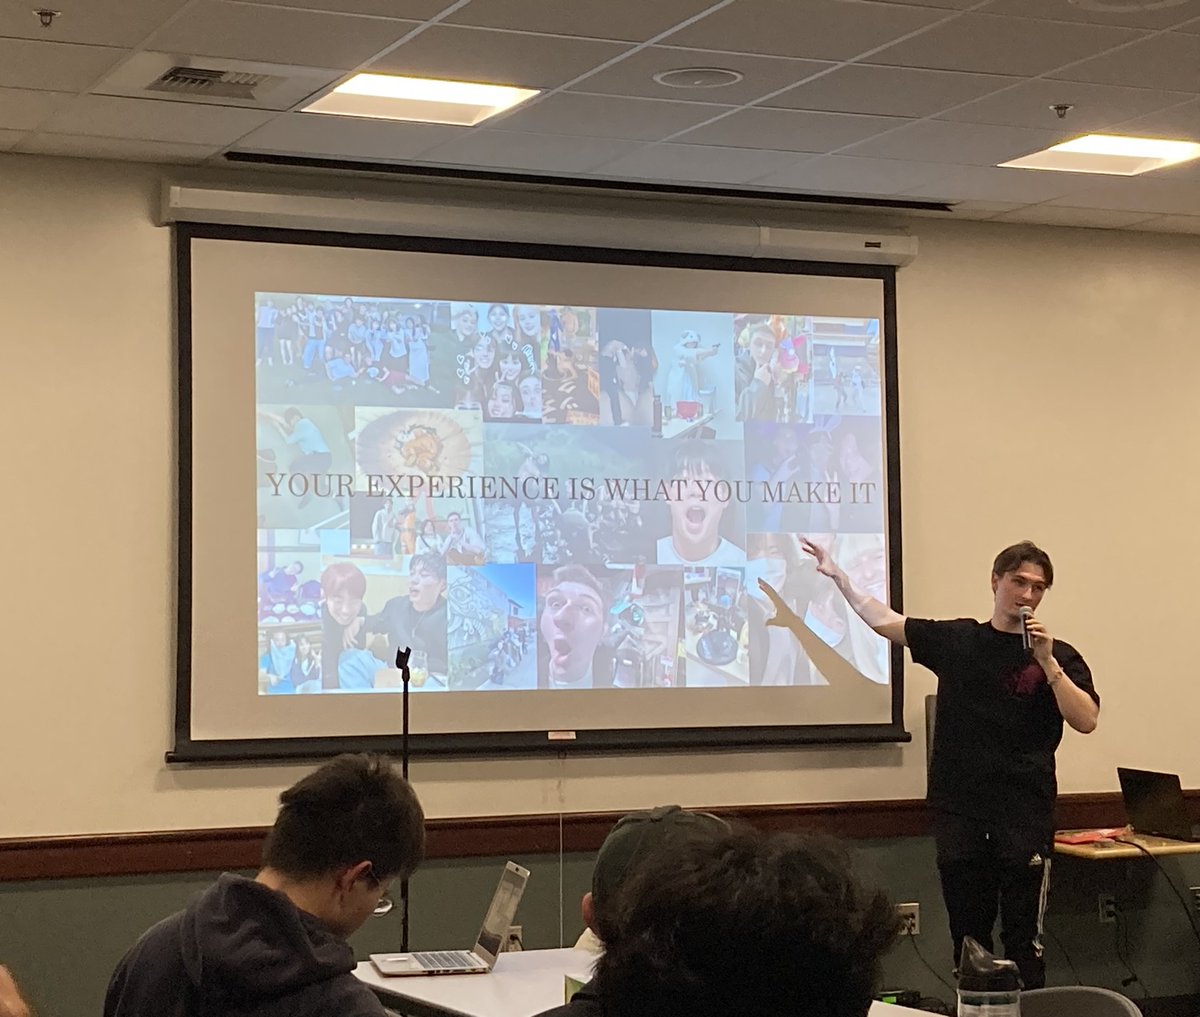 Hello! @ShinshuUni visited @sacstate, one of our #partner #universities. At Japan Club, we were glad to see a #student who studied @ShinshuUni last year. He gave a presentation about his #experience @ShinshuUni in #Japan. His message was fully confident. Thanks! #studyabroad